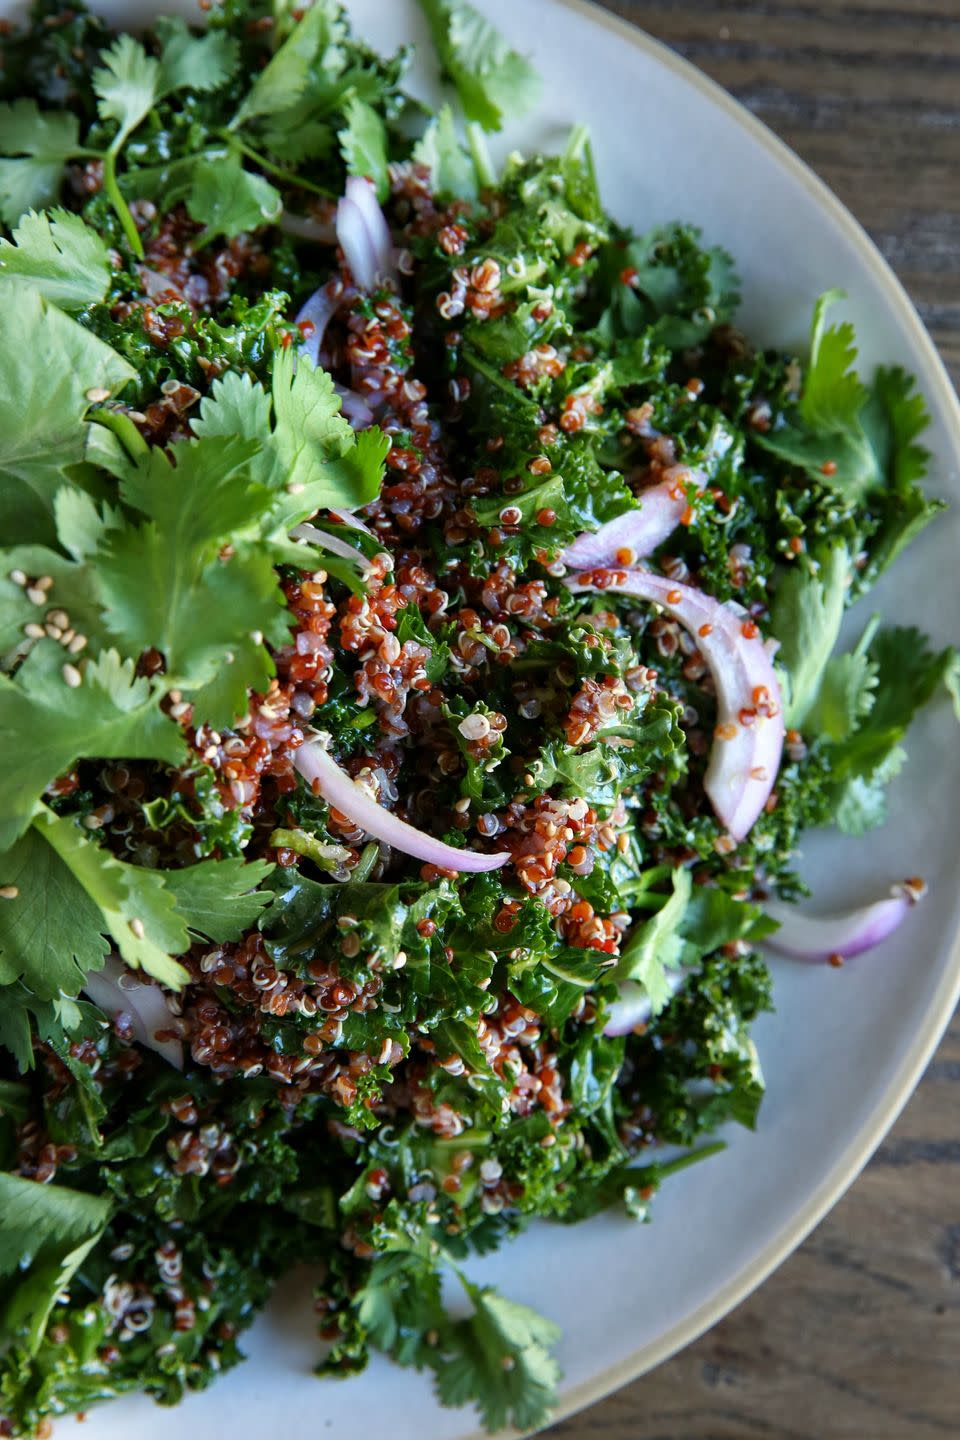 Kale and Red Quinoa Salad with Spicy Sesame Dressing